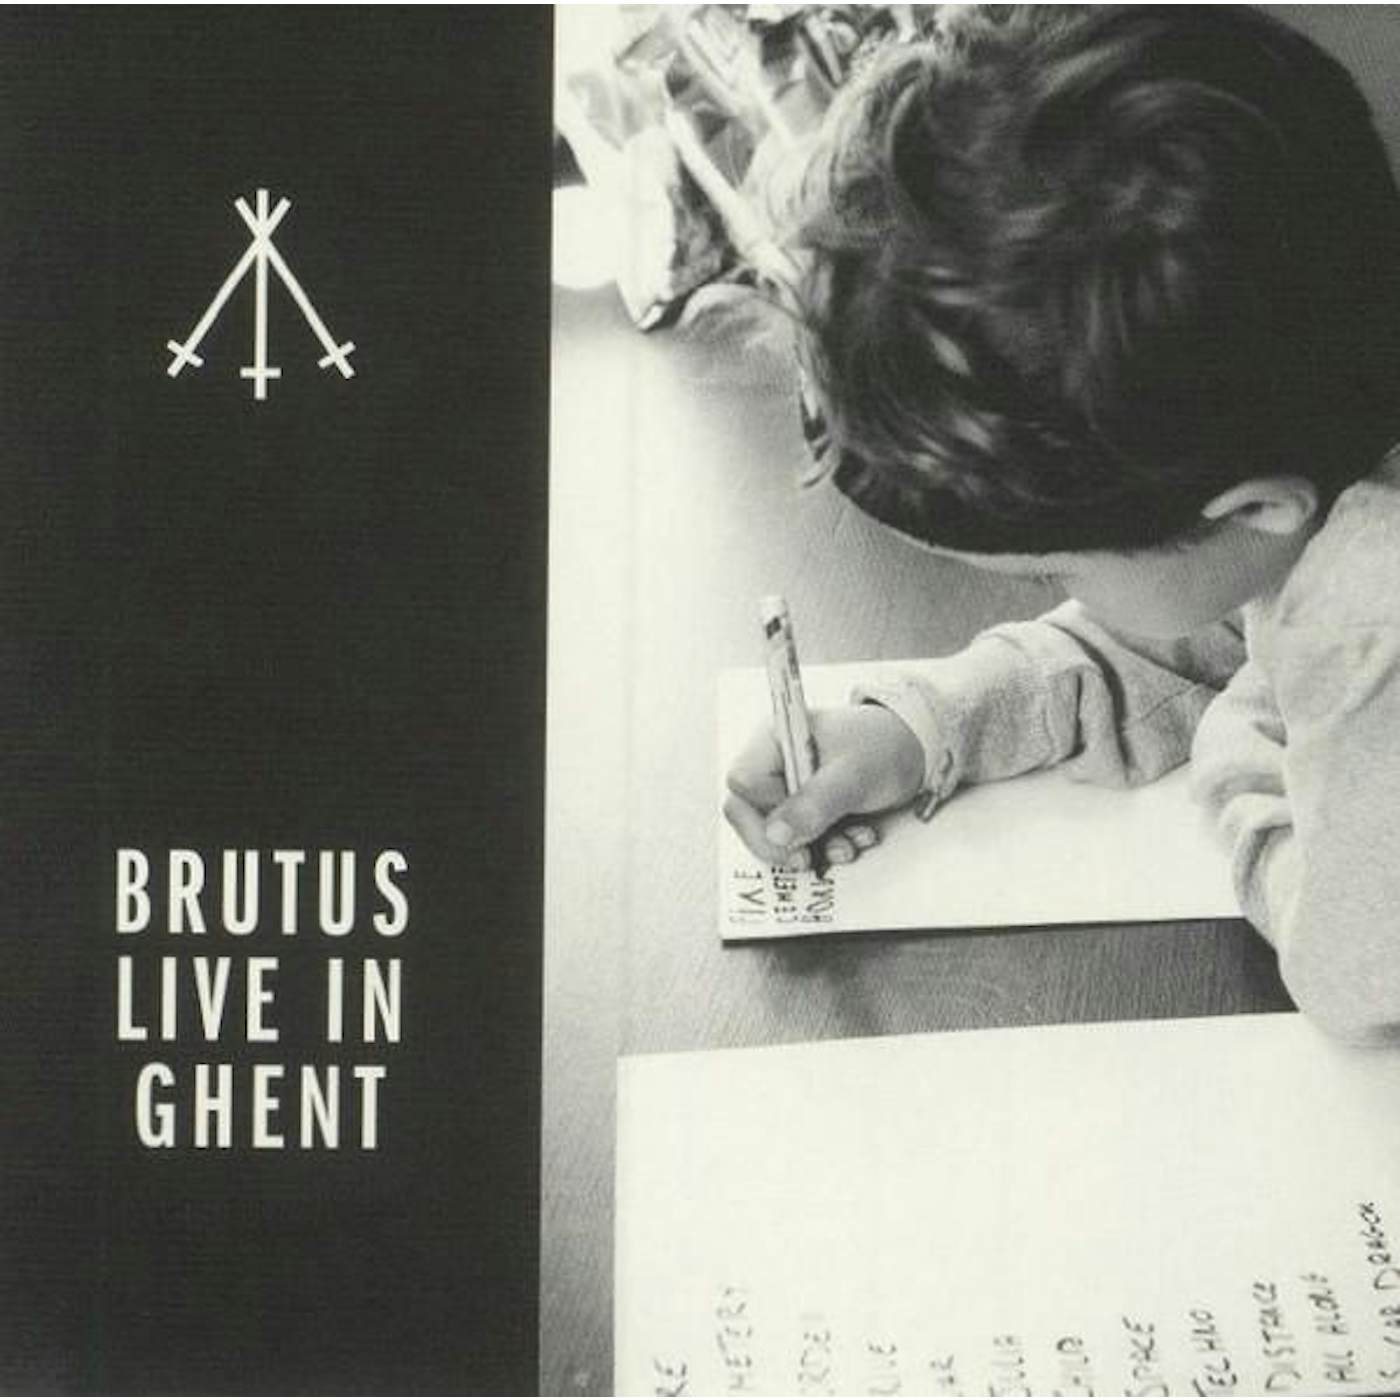 Brutus LIVE IN GHENT CD